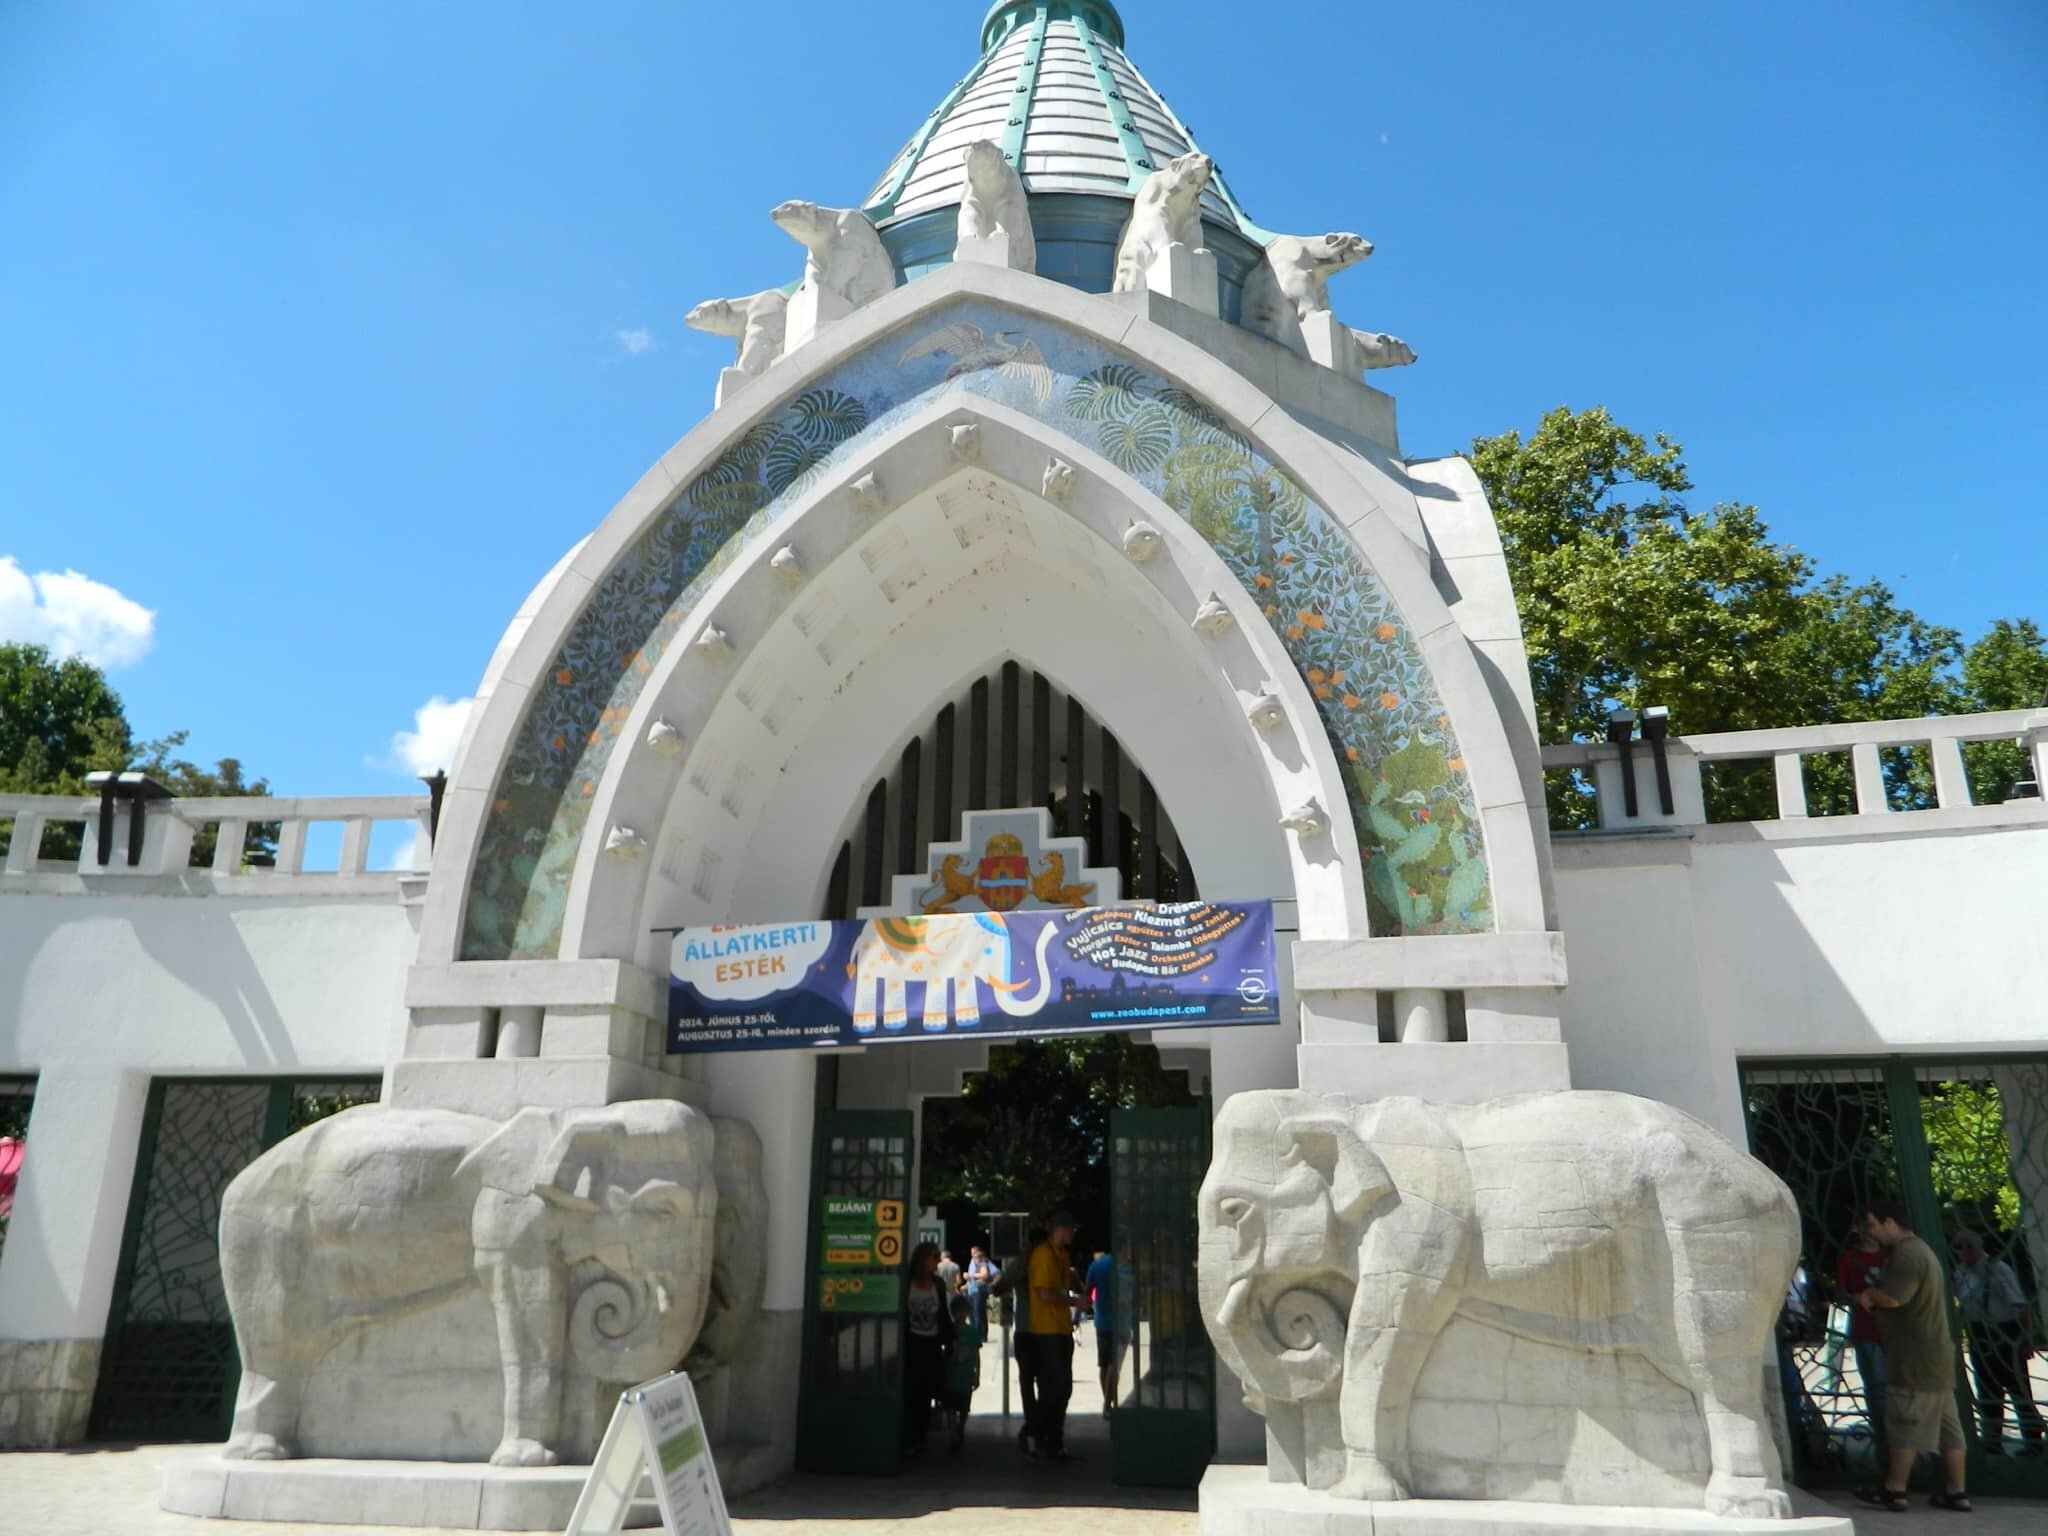 Entrance to Budapest Zoo